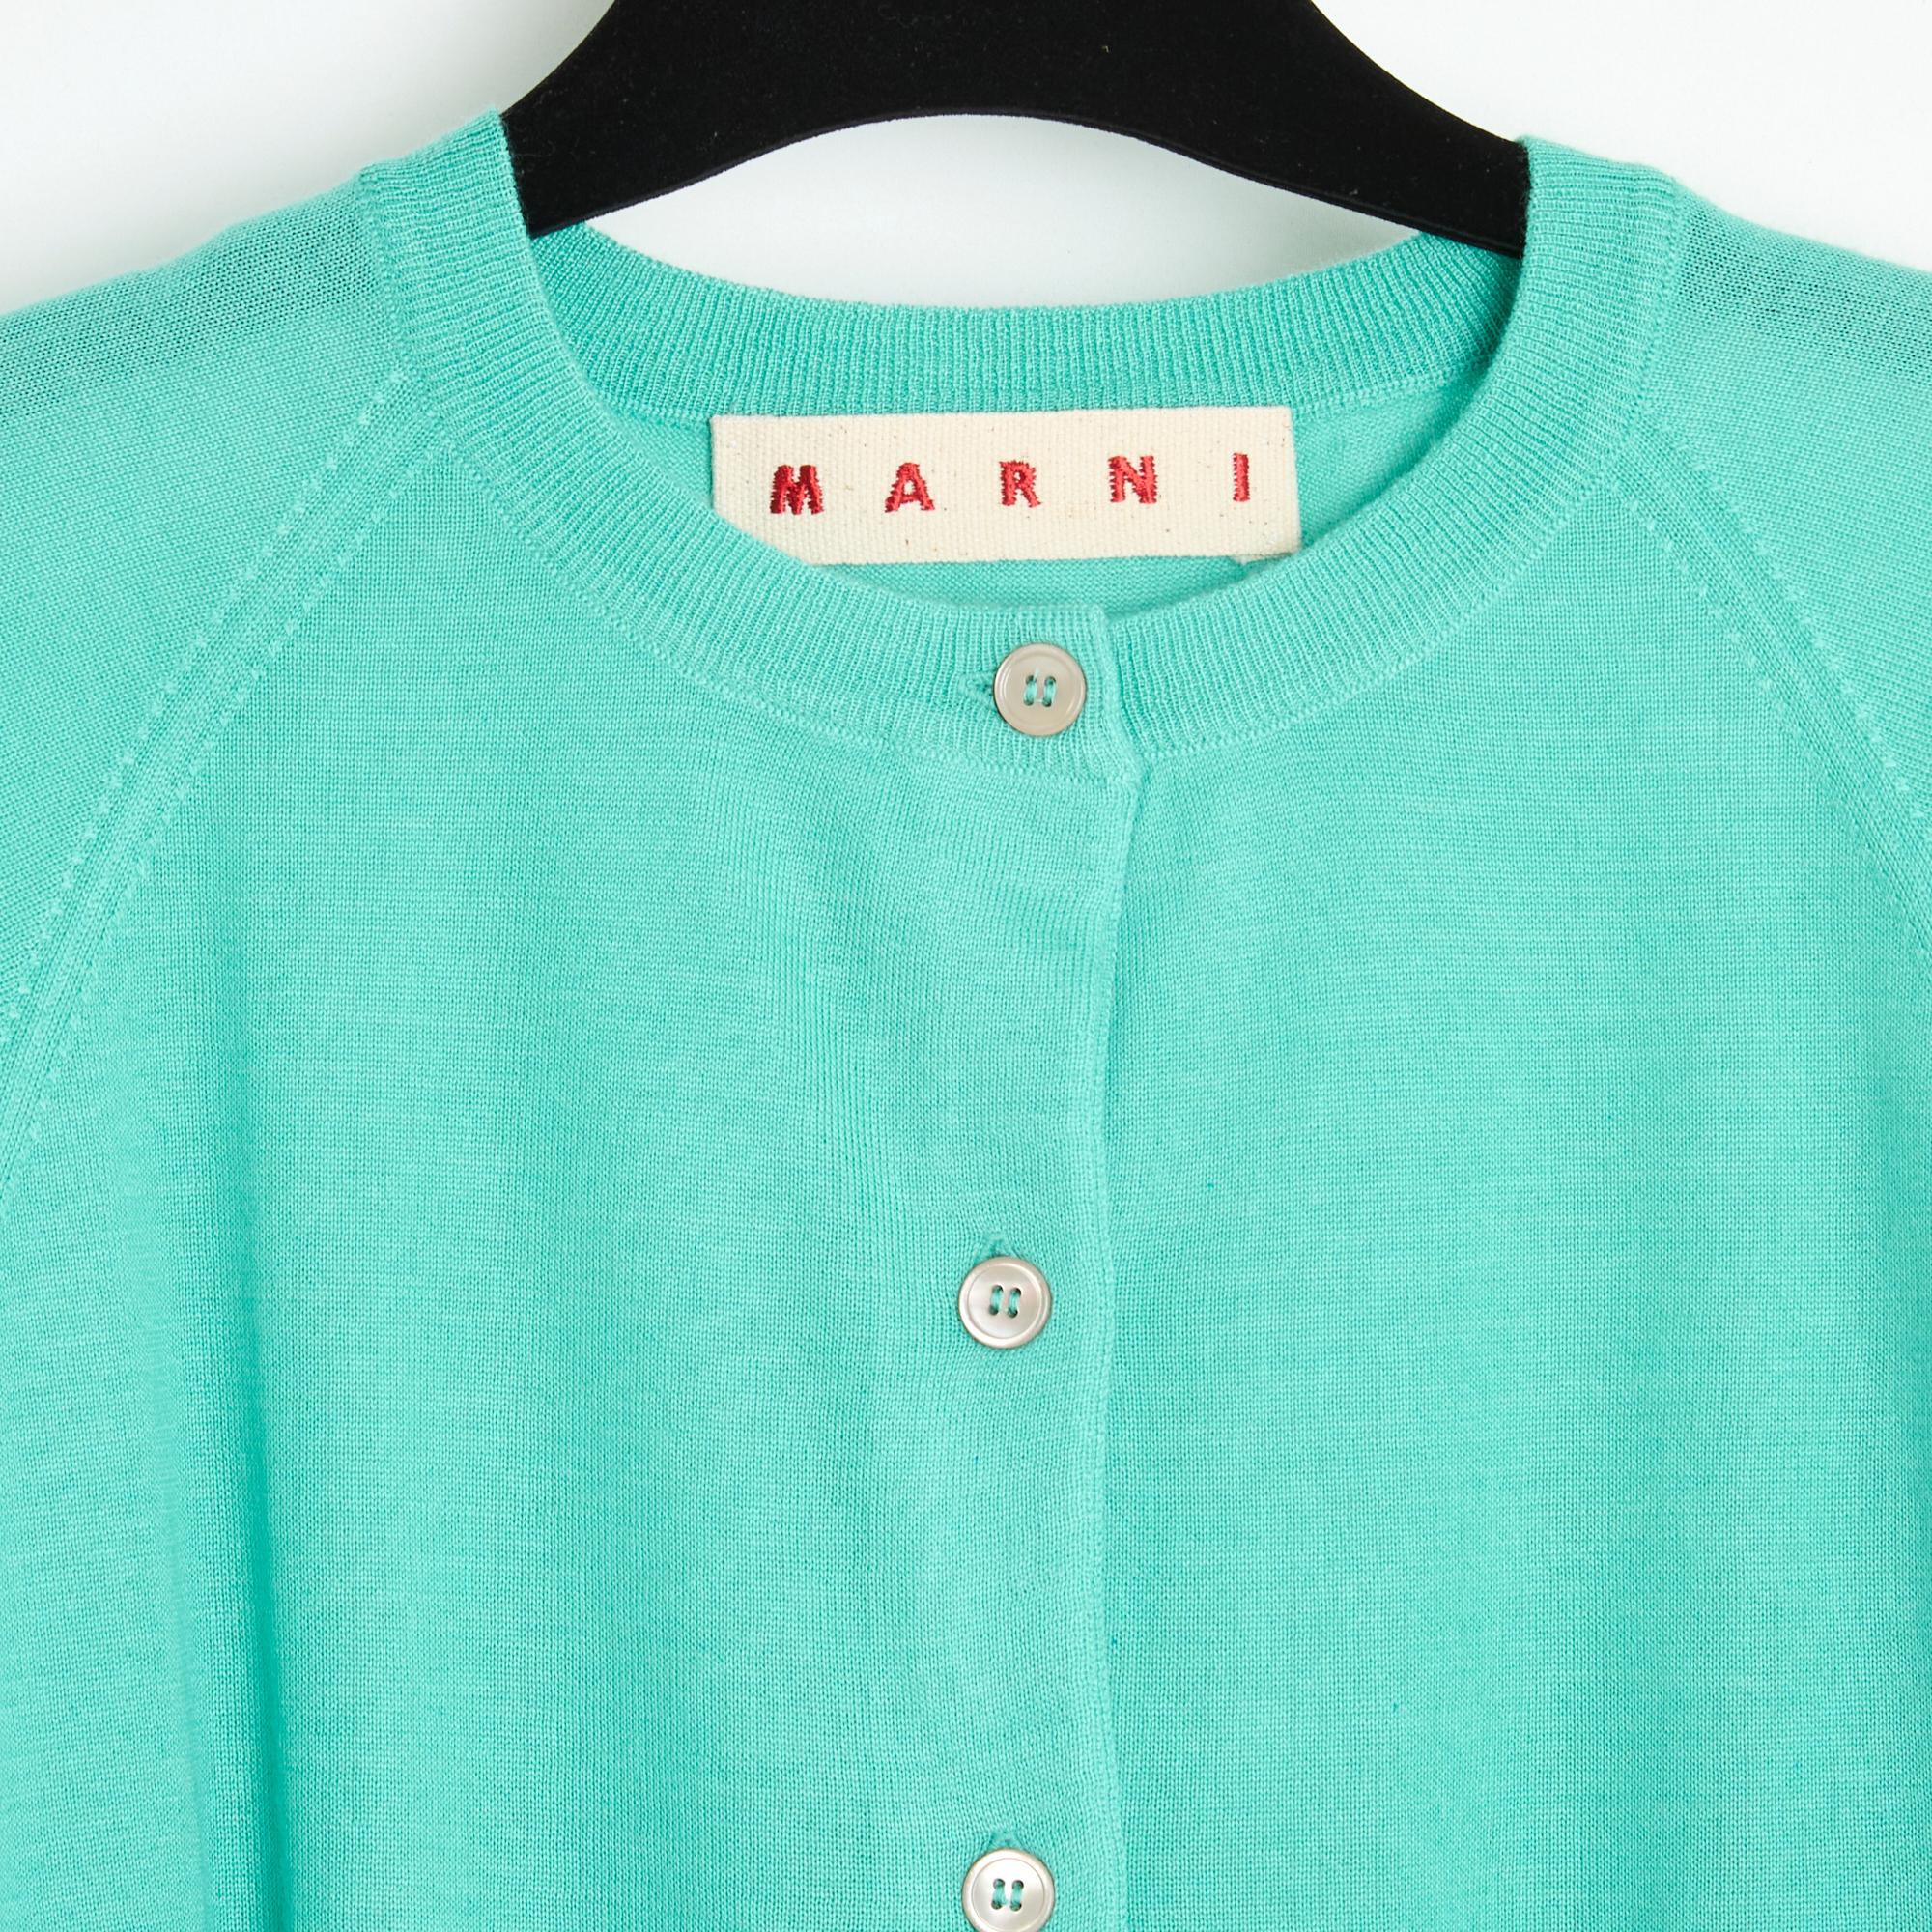 Marni cardigan in fine green cashmere, slightly wide and short shape, round neck closed in front with 6 buttons, long sleeves, ribbed finish. Size 44IT or 40FR: middle 40 cm, chest 48 cm, length 50 cm, sleeves 66 cm. The cardigan seems to have never